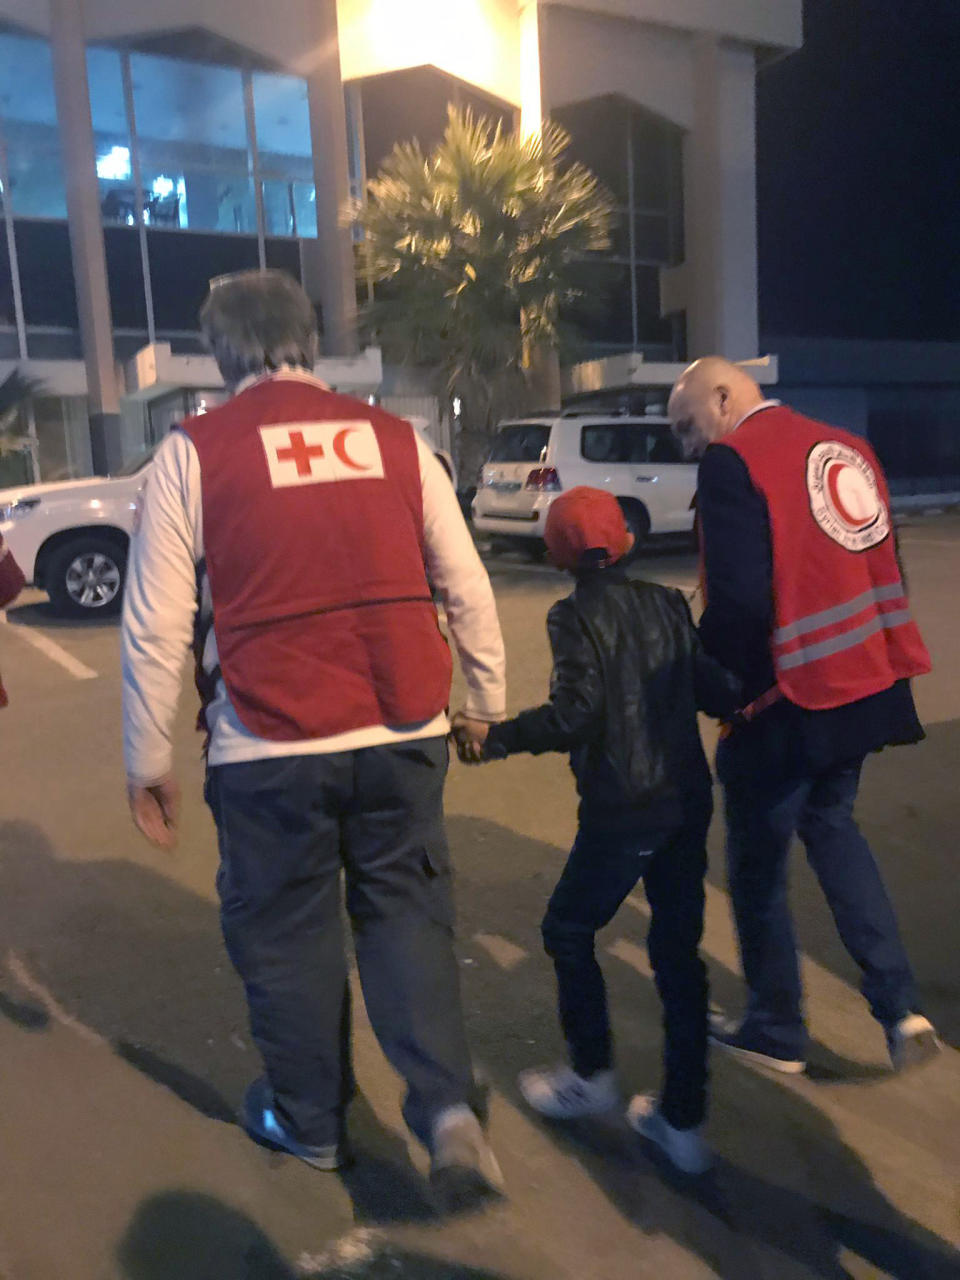 In this photo taken Wednesday, Nov. 6, 2019, Alvin, an 11-year-old Albanian boy who was taken to Syria by his mother when she joined the Islamic State group, is accompanied to Damascus airport by Red Cross and Red Crescent officials, after he was freed from a crowded detention camp. The boy, who found himself with no family in the al-Hol camp run by Kurdish forces in northeastern Syria after his mother and siblings died amid fighting, is heading home, to Italy, where his father lives. (International Federation of Red Cross and Red Crescent photo via AP)